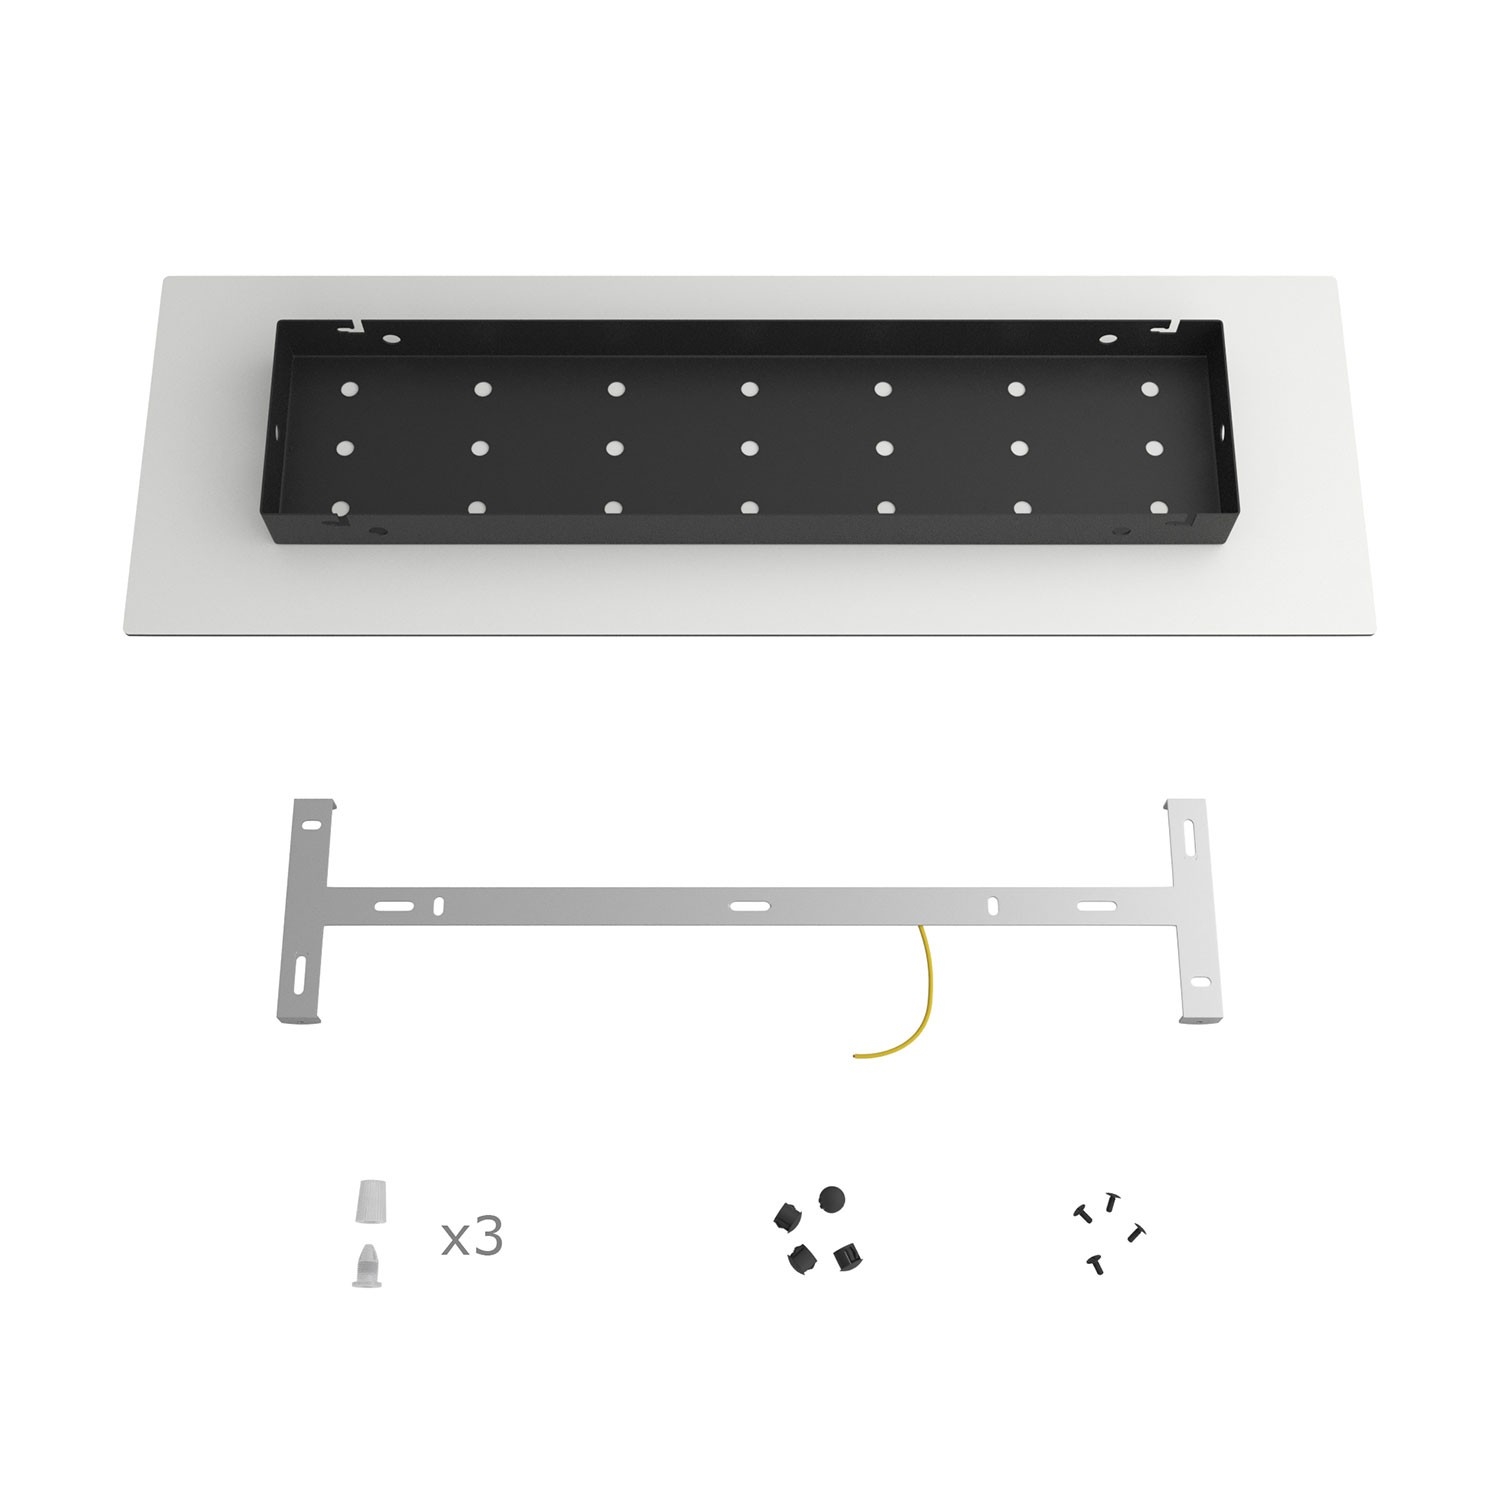 3 hole in line - EXTRA LARGE Rectangular Ceiling Canopy Kit - Rose One System, 675 x 225 mm Cover